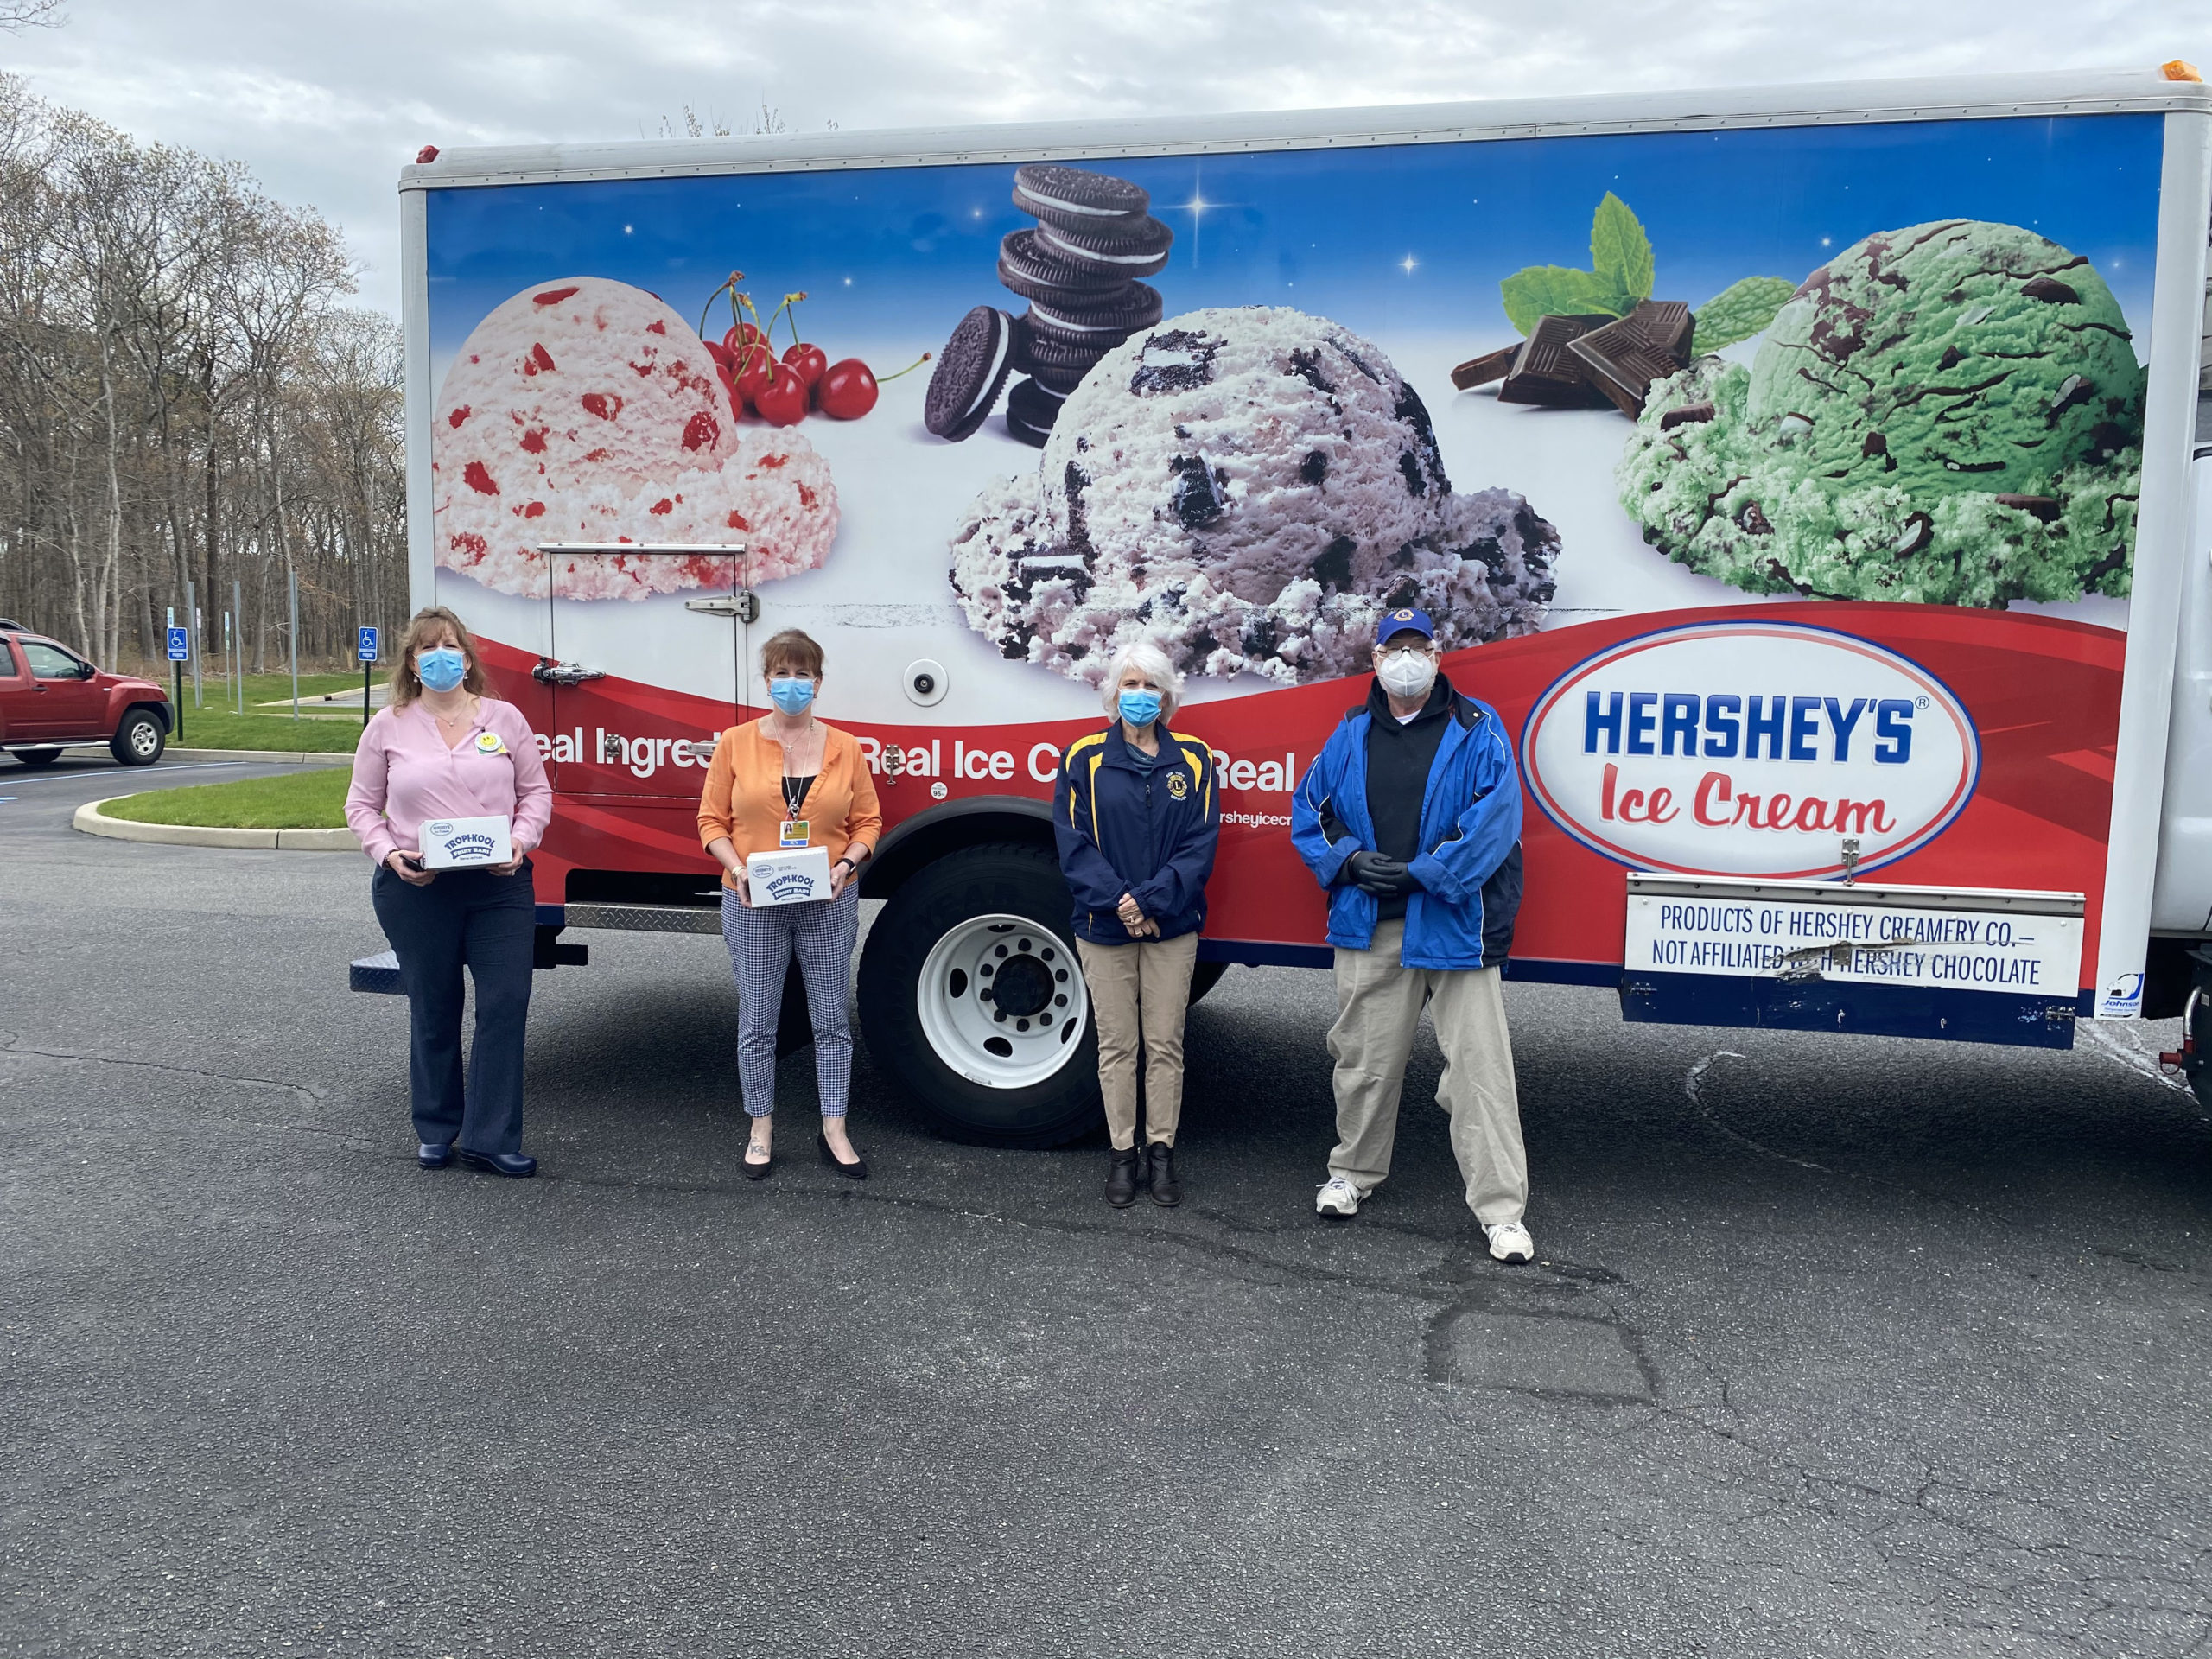 After receiving a grant from Lions International, which has donated over 3,000,000 towards Covid relief, the Lions Clubs of Long Island  distributed ice cream treats to most of the hospitals in Nassau and Suffolk counties. Realizing that nursing home staff are also on the front lines in this crisis, 500 treats were delivered to the Westhampton Care Center last week to show support and to say thank you. Left to right, Kelly Brady, facility administrator; Valleri Barba, director of nursing Judi Perez, president Southold Lions Club and Steve Espach, district governor elect and member, Sag Harbor Lions Club.